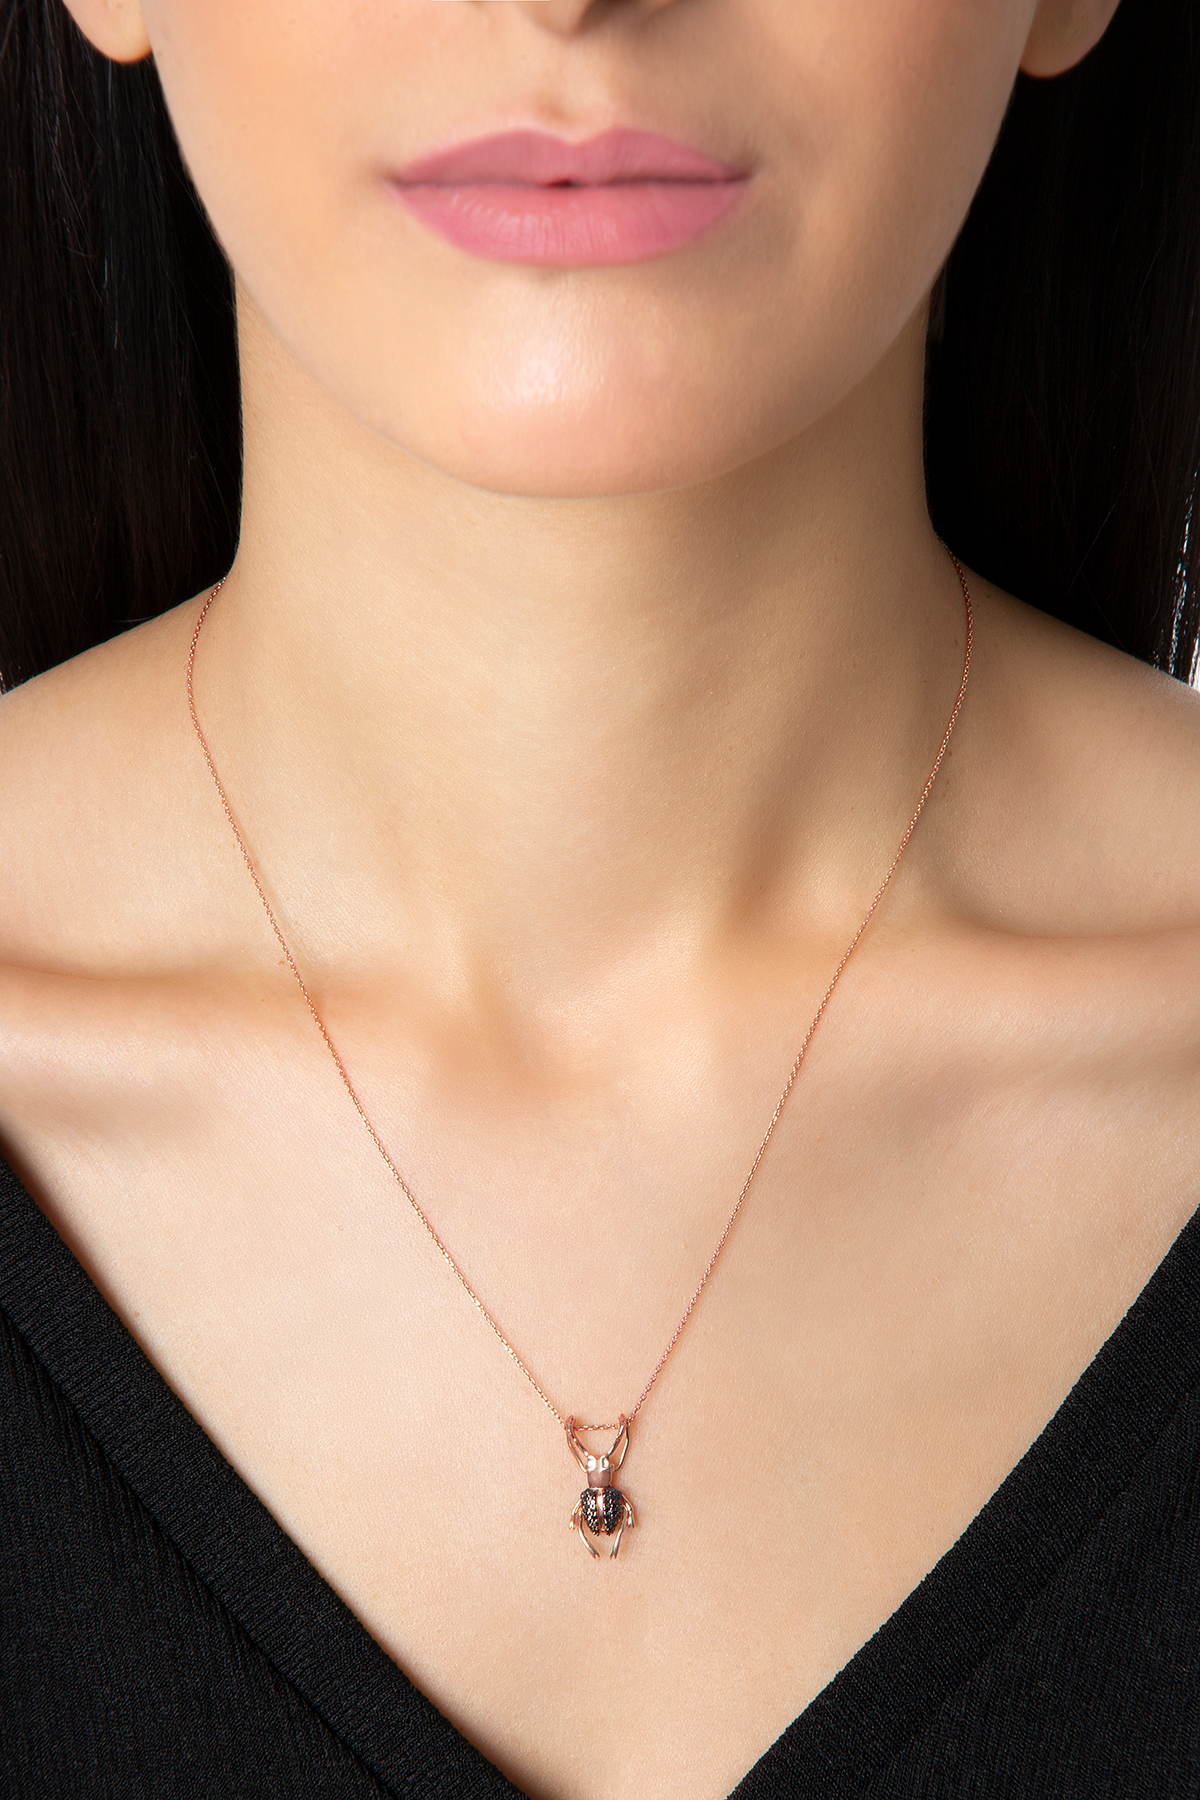 Stag Beetle Necklace in Rose Gold - Her Story Shop